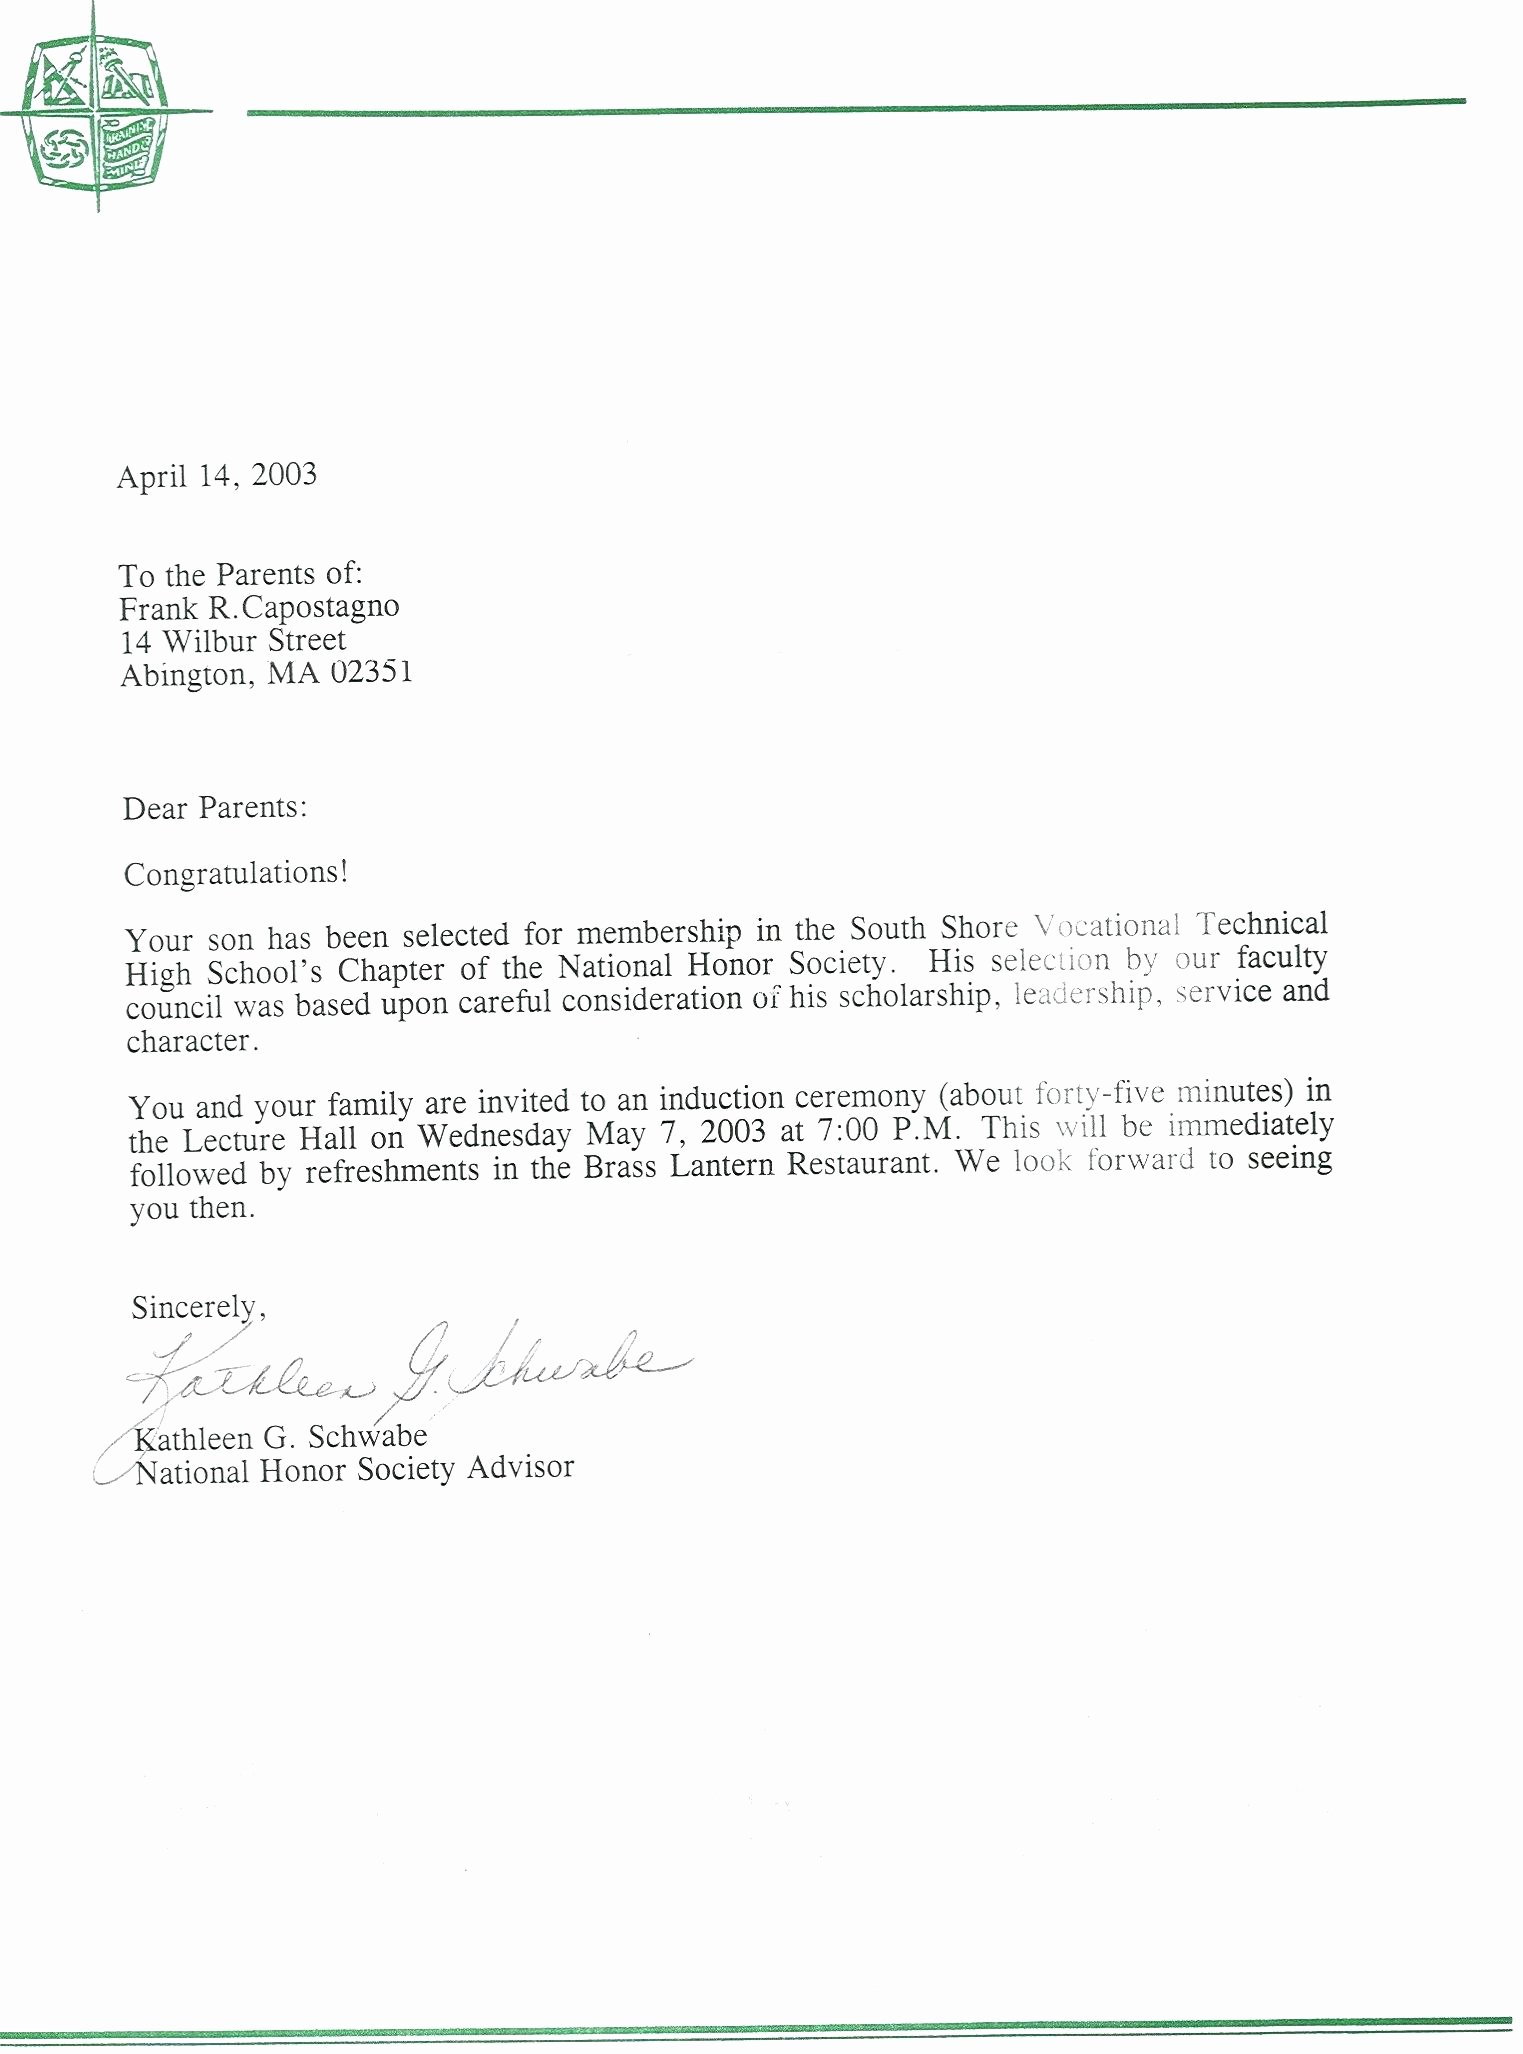 Nhs Letter Of Recommendation Template Beautiful Nhs Letter Re Mendation Template Examples